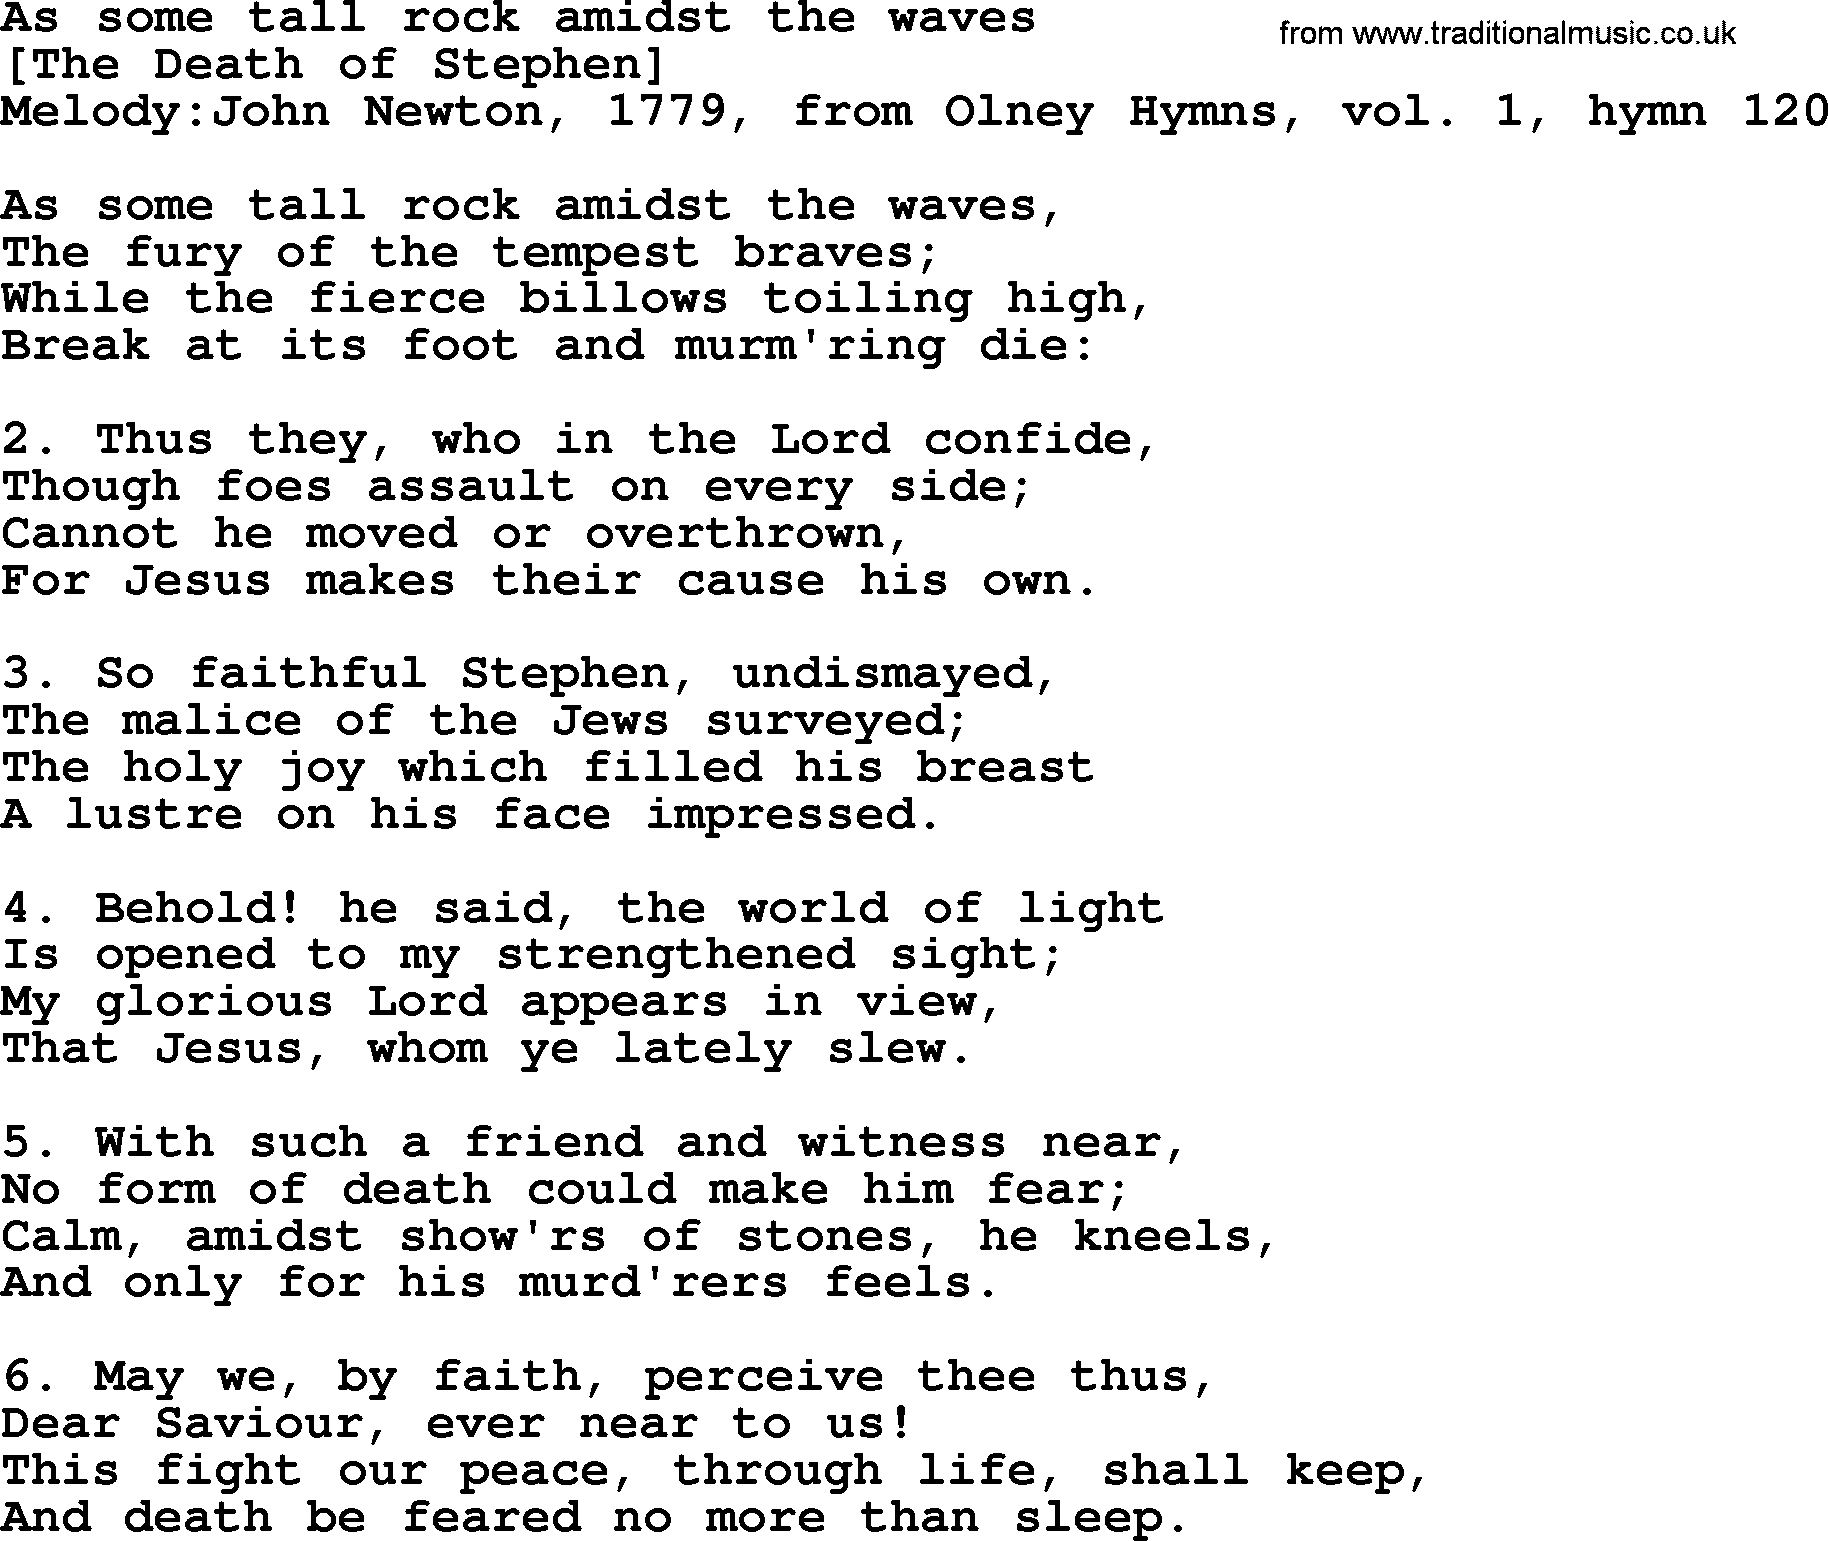 Old English Song Lyrics for As Some Tall Rock Amidst The Waves, with PDF